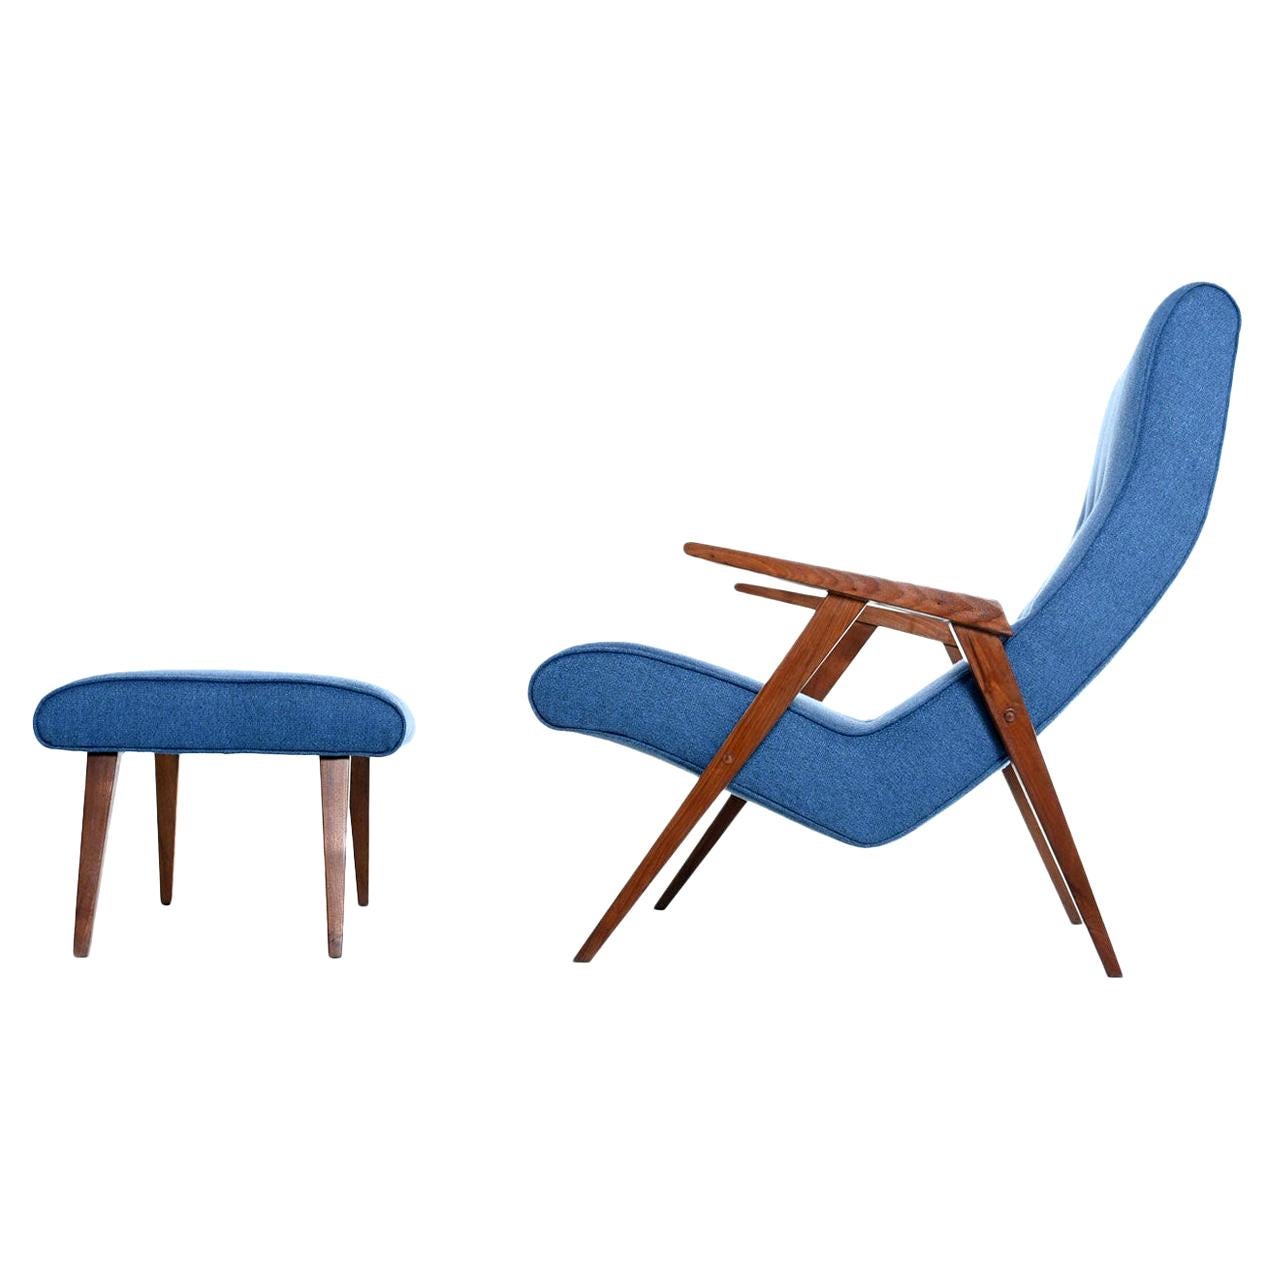 This one is a head scratcher. We are completely stumped on the maker of this late 1950s scoop style lounge chair and ottoman. It looks like similar work by Adrian Pearsall and Jens Risom, but it's not. At first, the arms and legs appeared to be